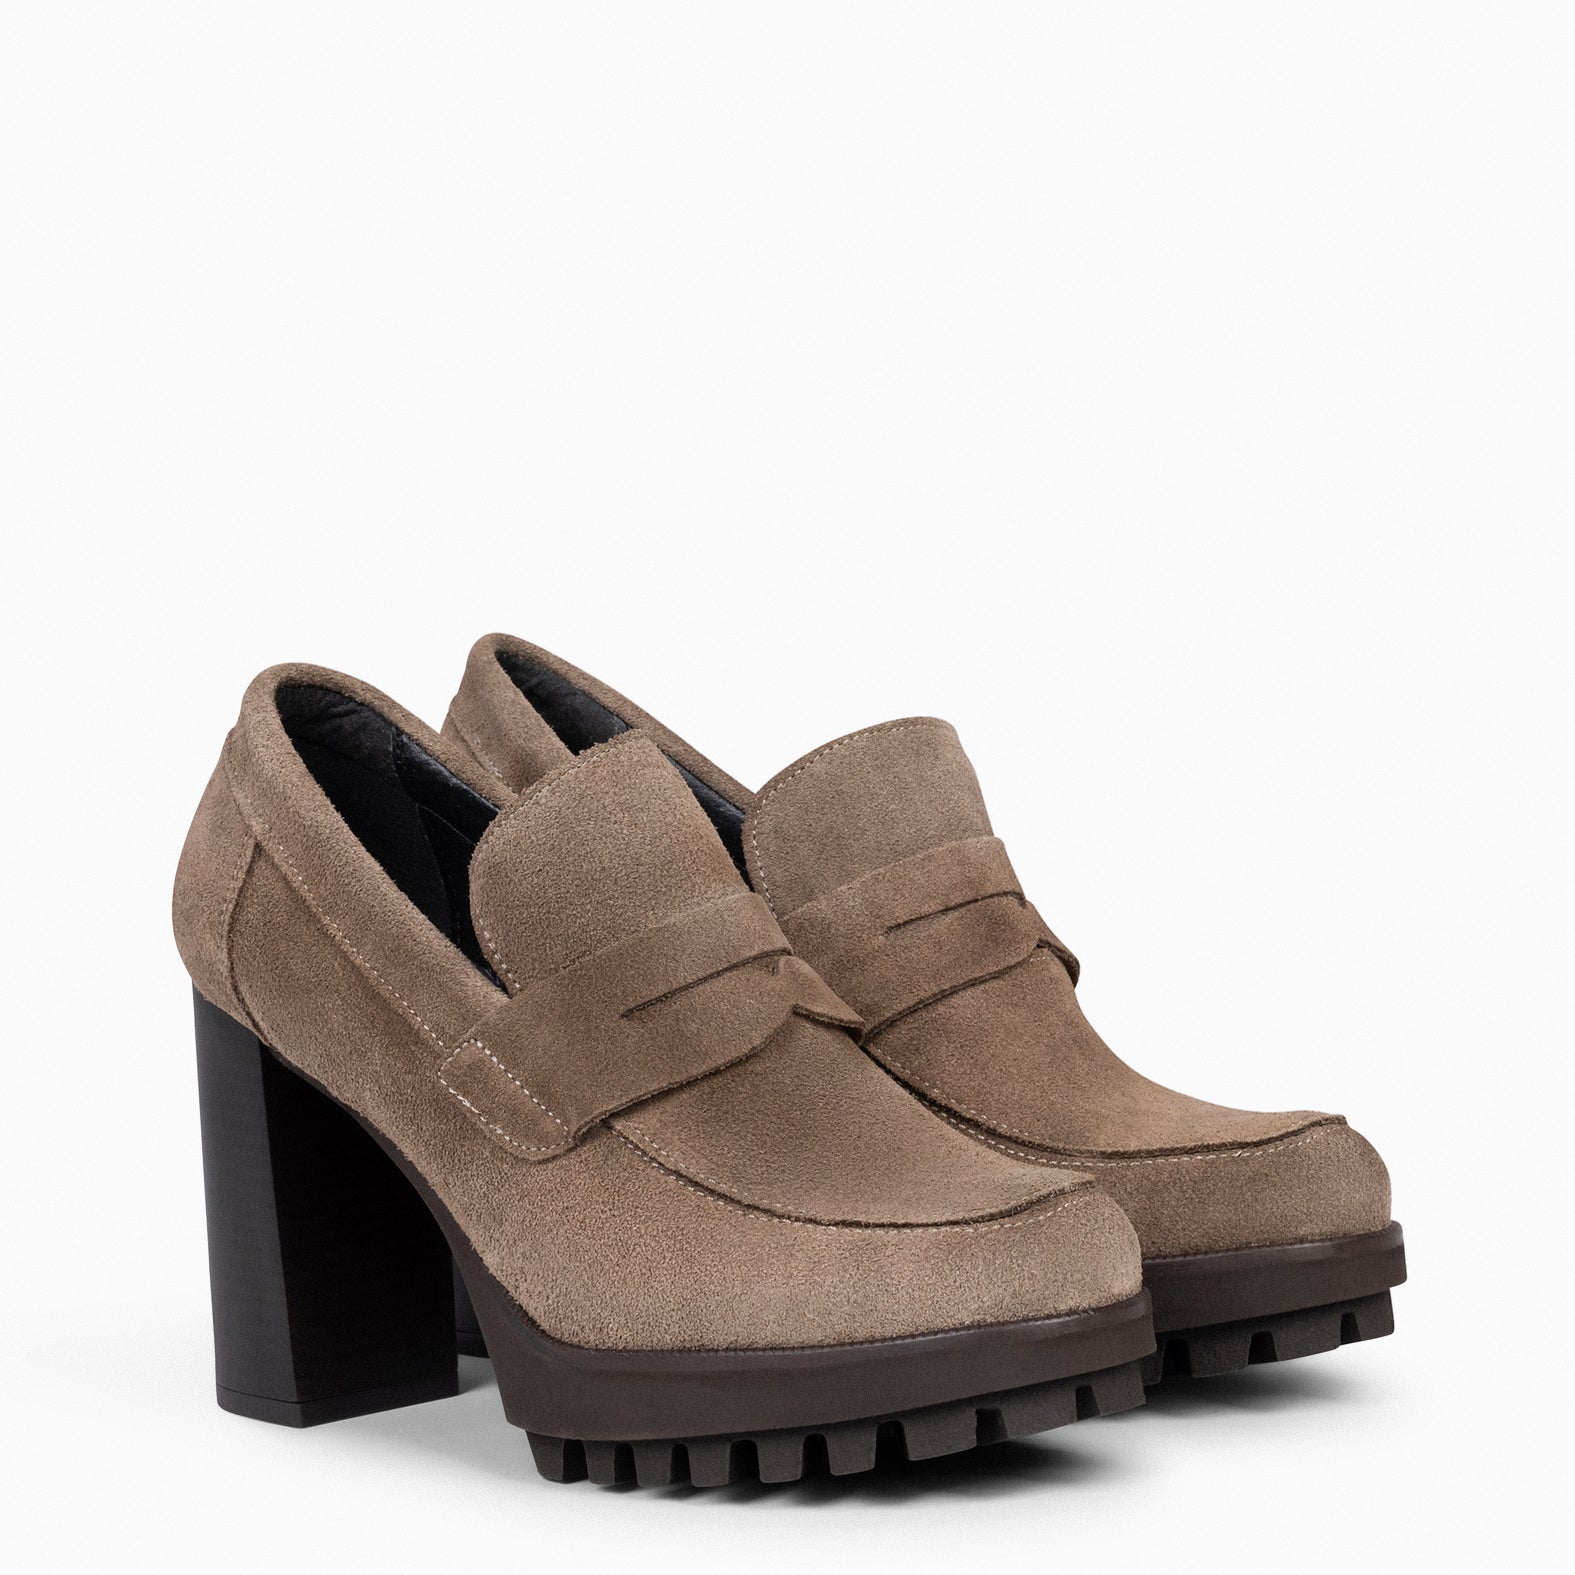 TREND – TAUPE high heel moccasins with platform 